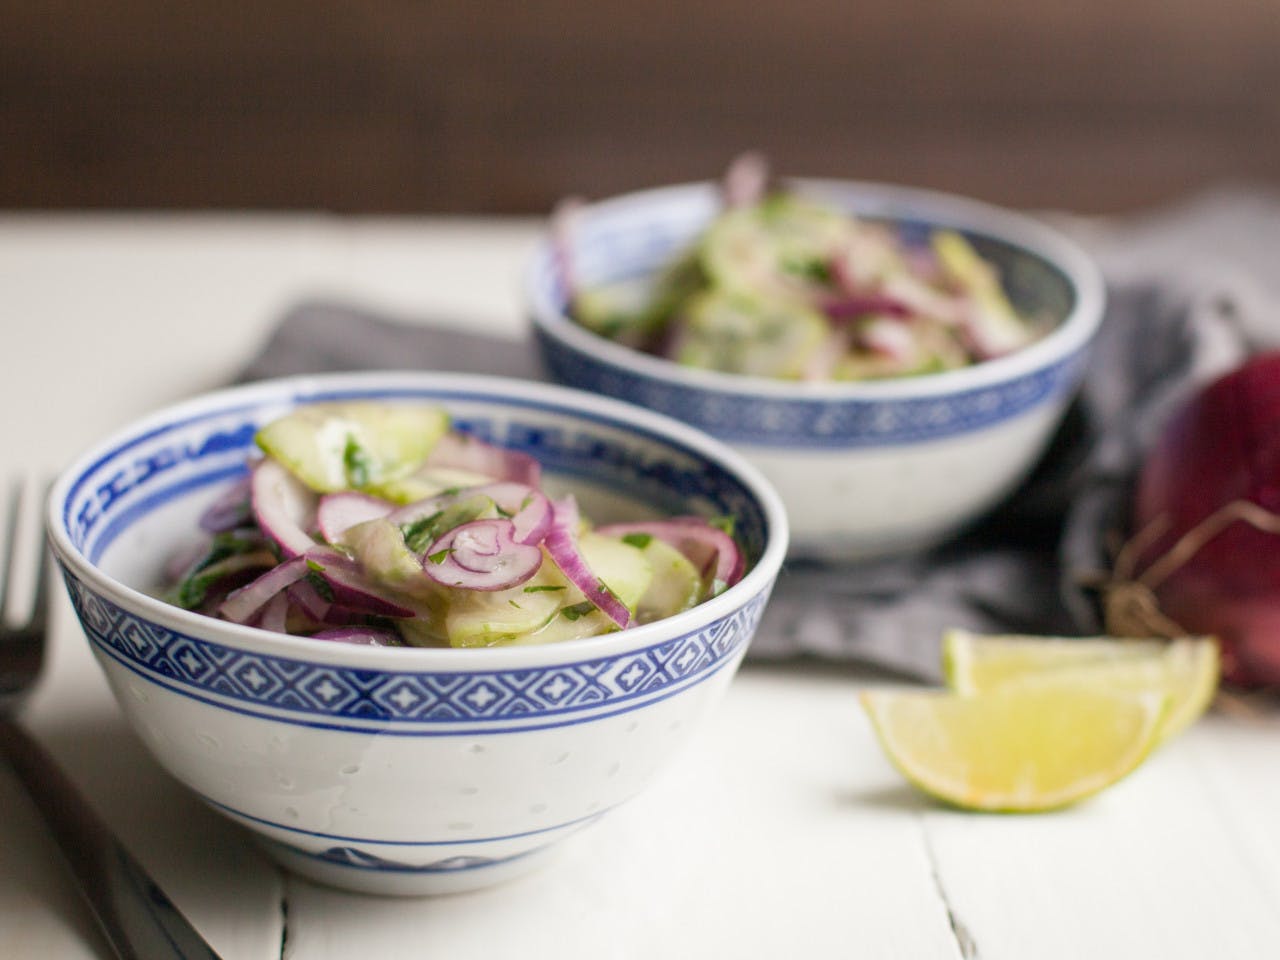 Cucumber salad with lime and coriander